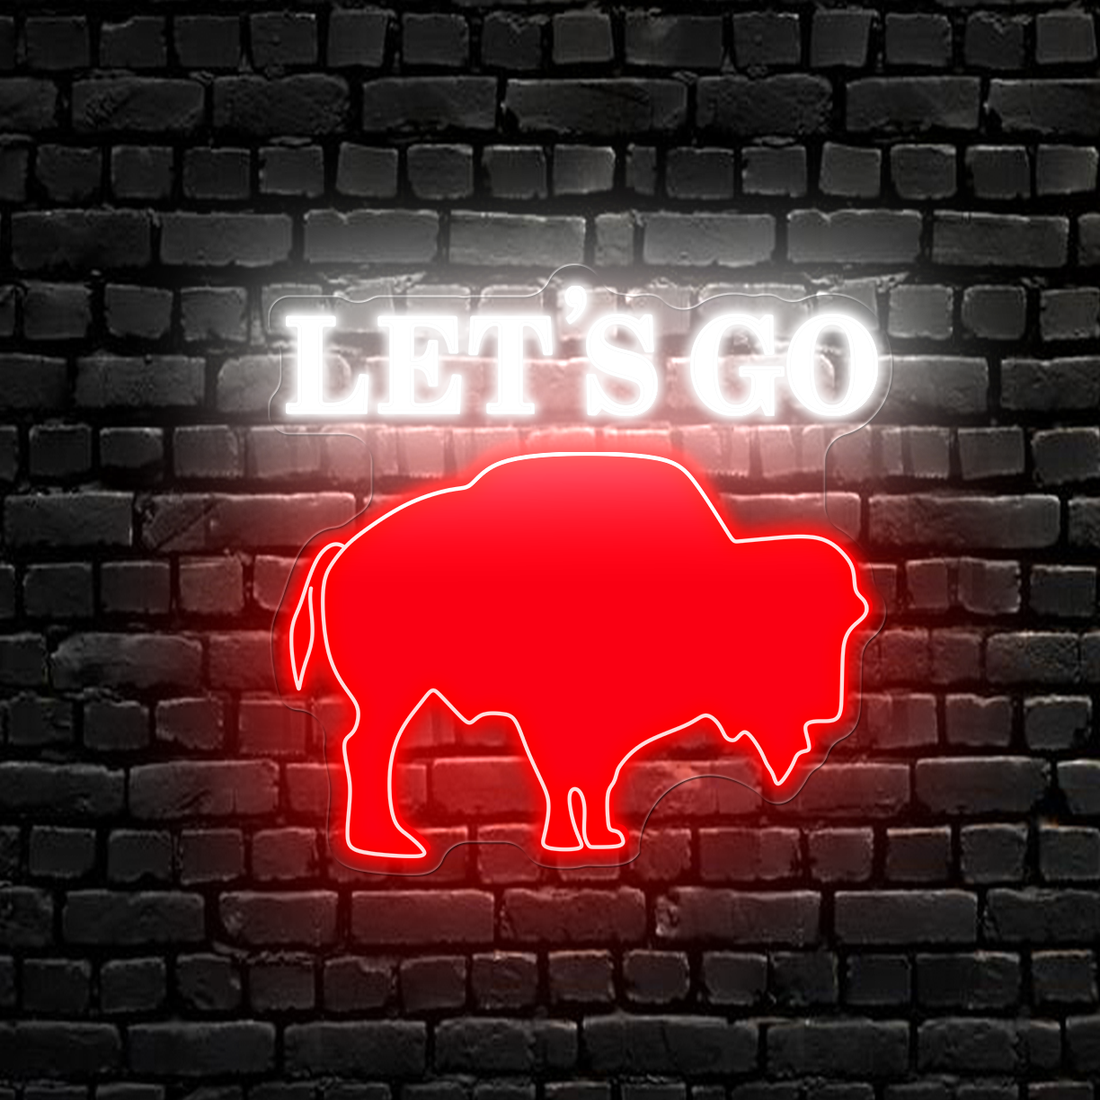 Red Buffalo LED Neon Sign